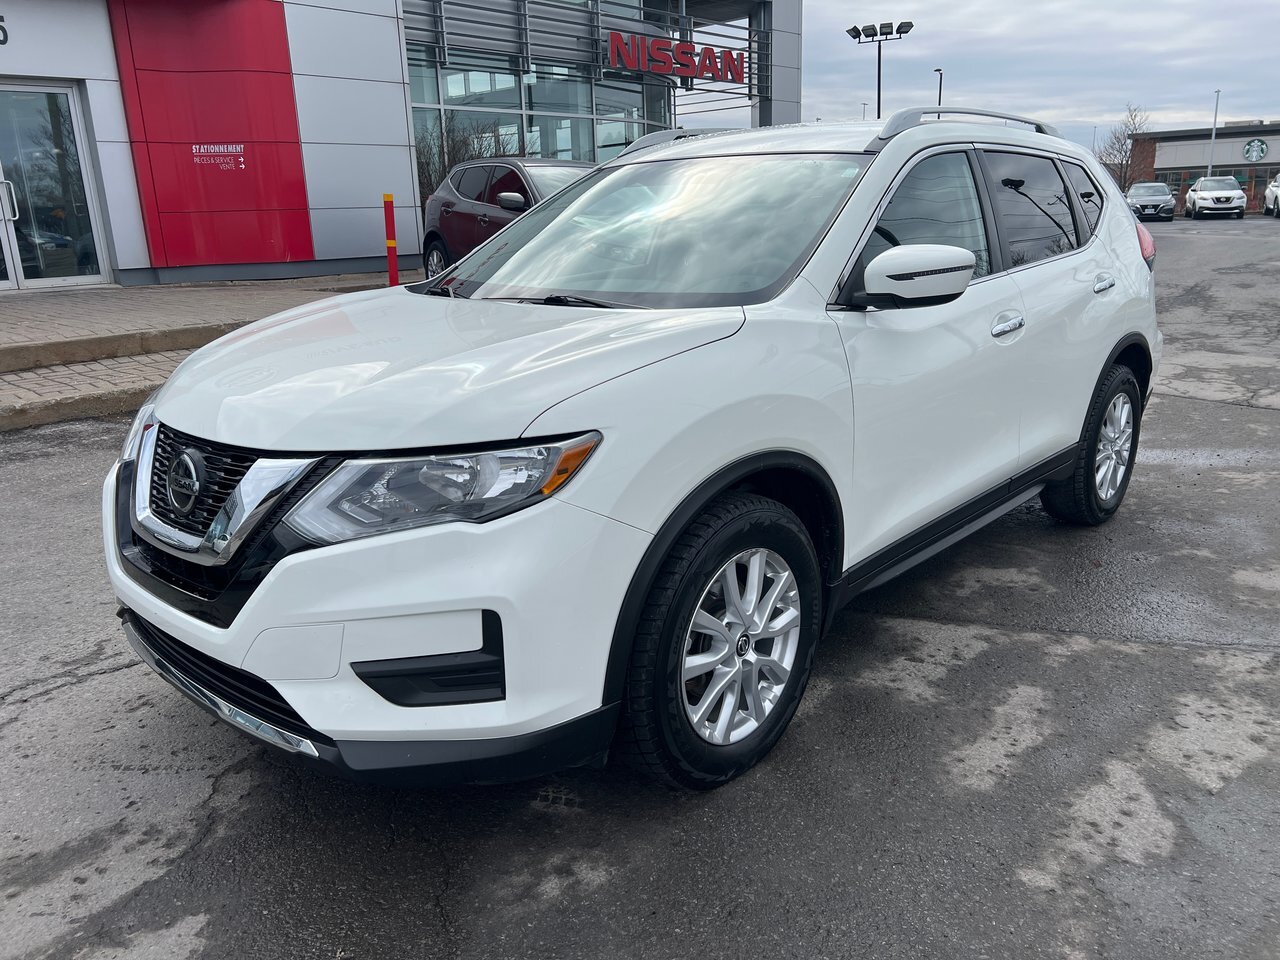 2019 Nissan Rogue SPECIALE EDITION FWD BACKUP CAMERA // HEATED SEATS